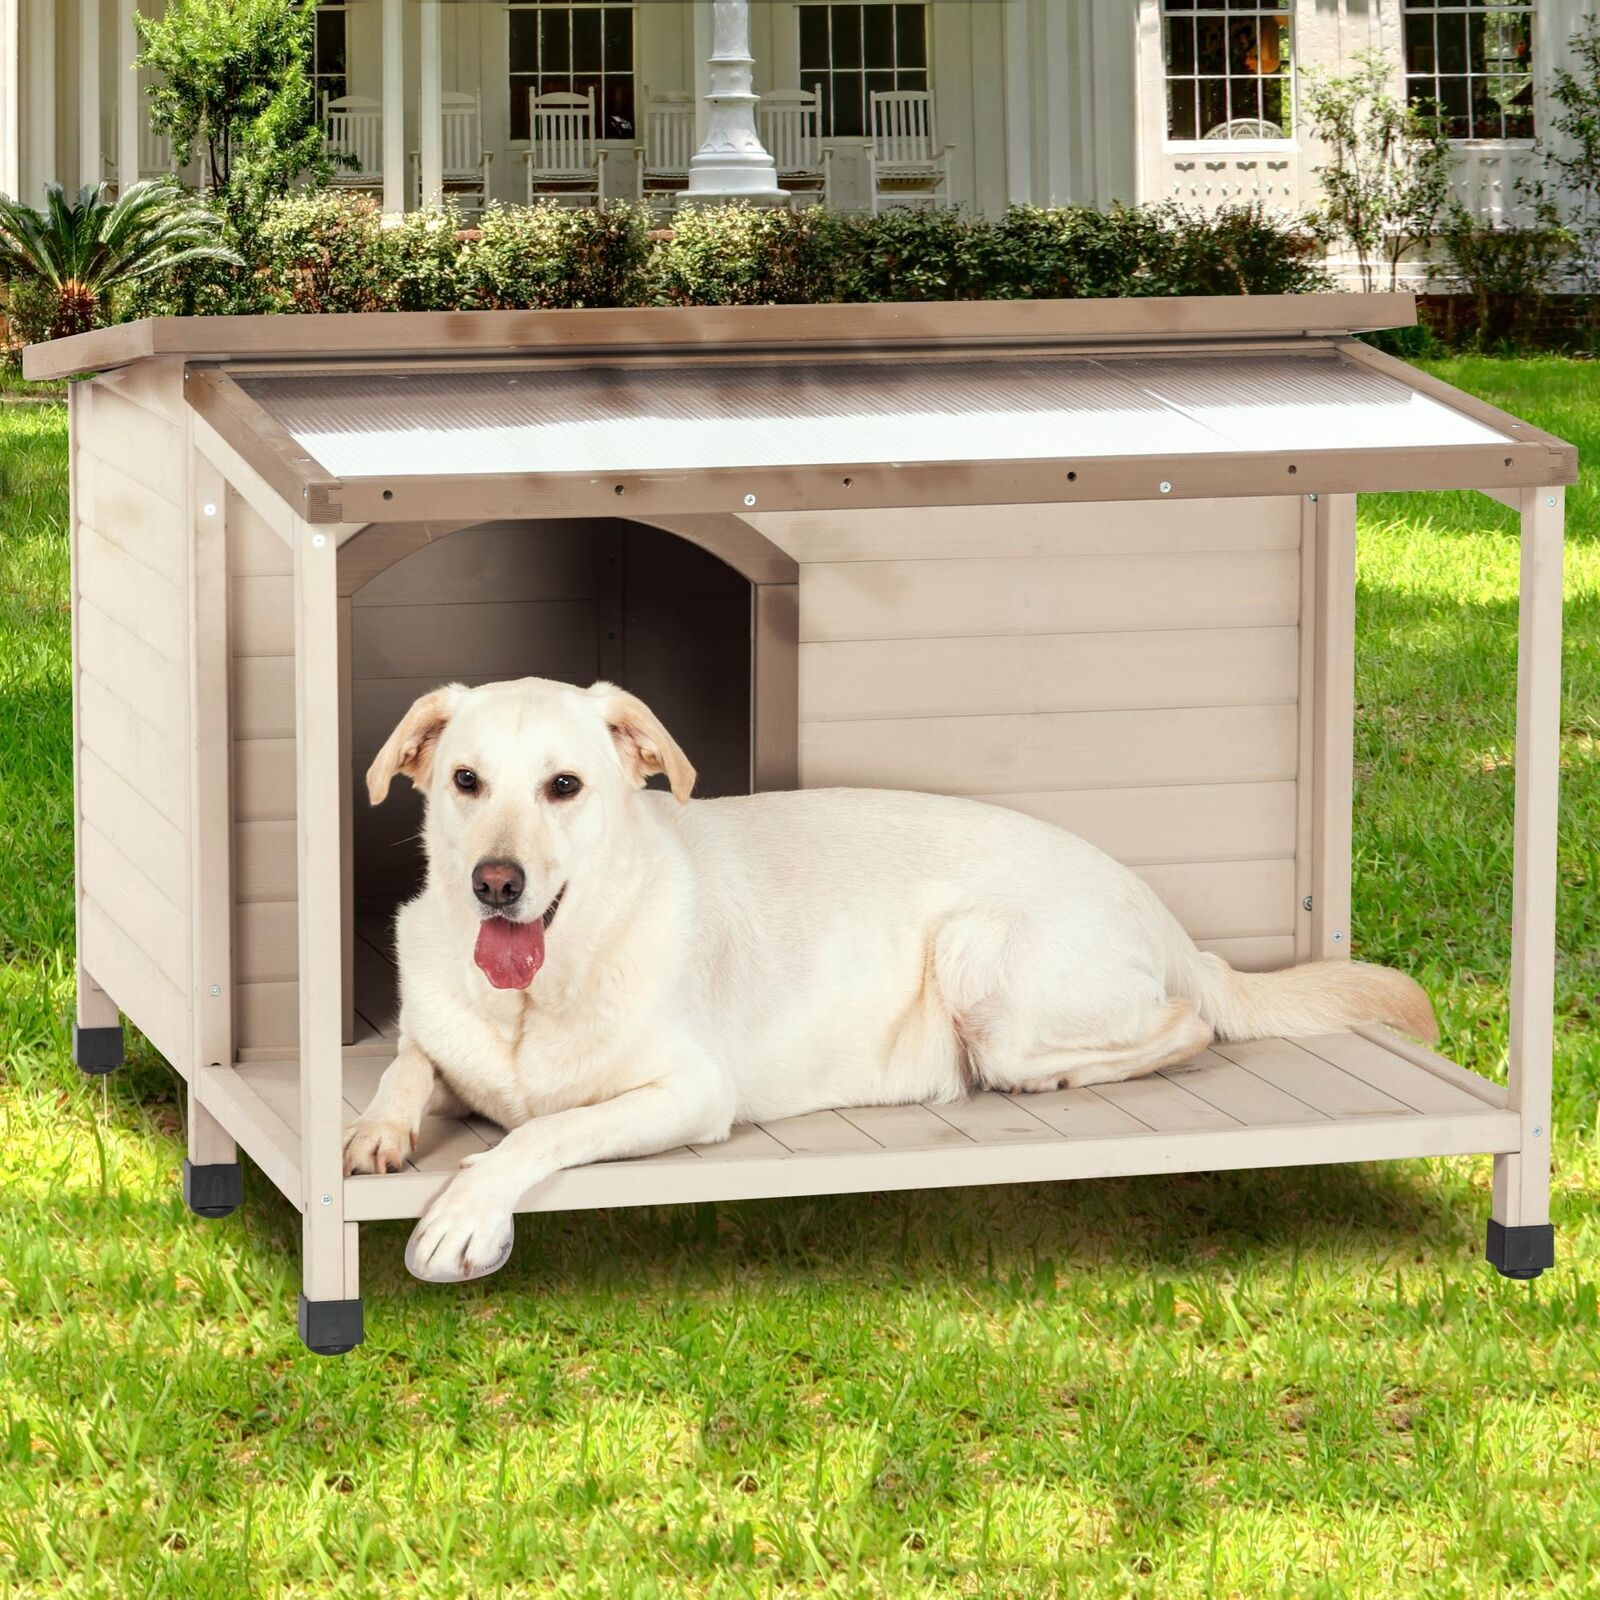 thinkstar Large Elevated Indoor Outdoor Dog House With Porch Waterproof Dog Kennel Shelter